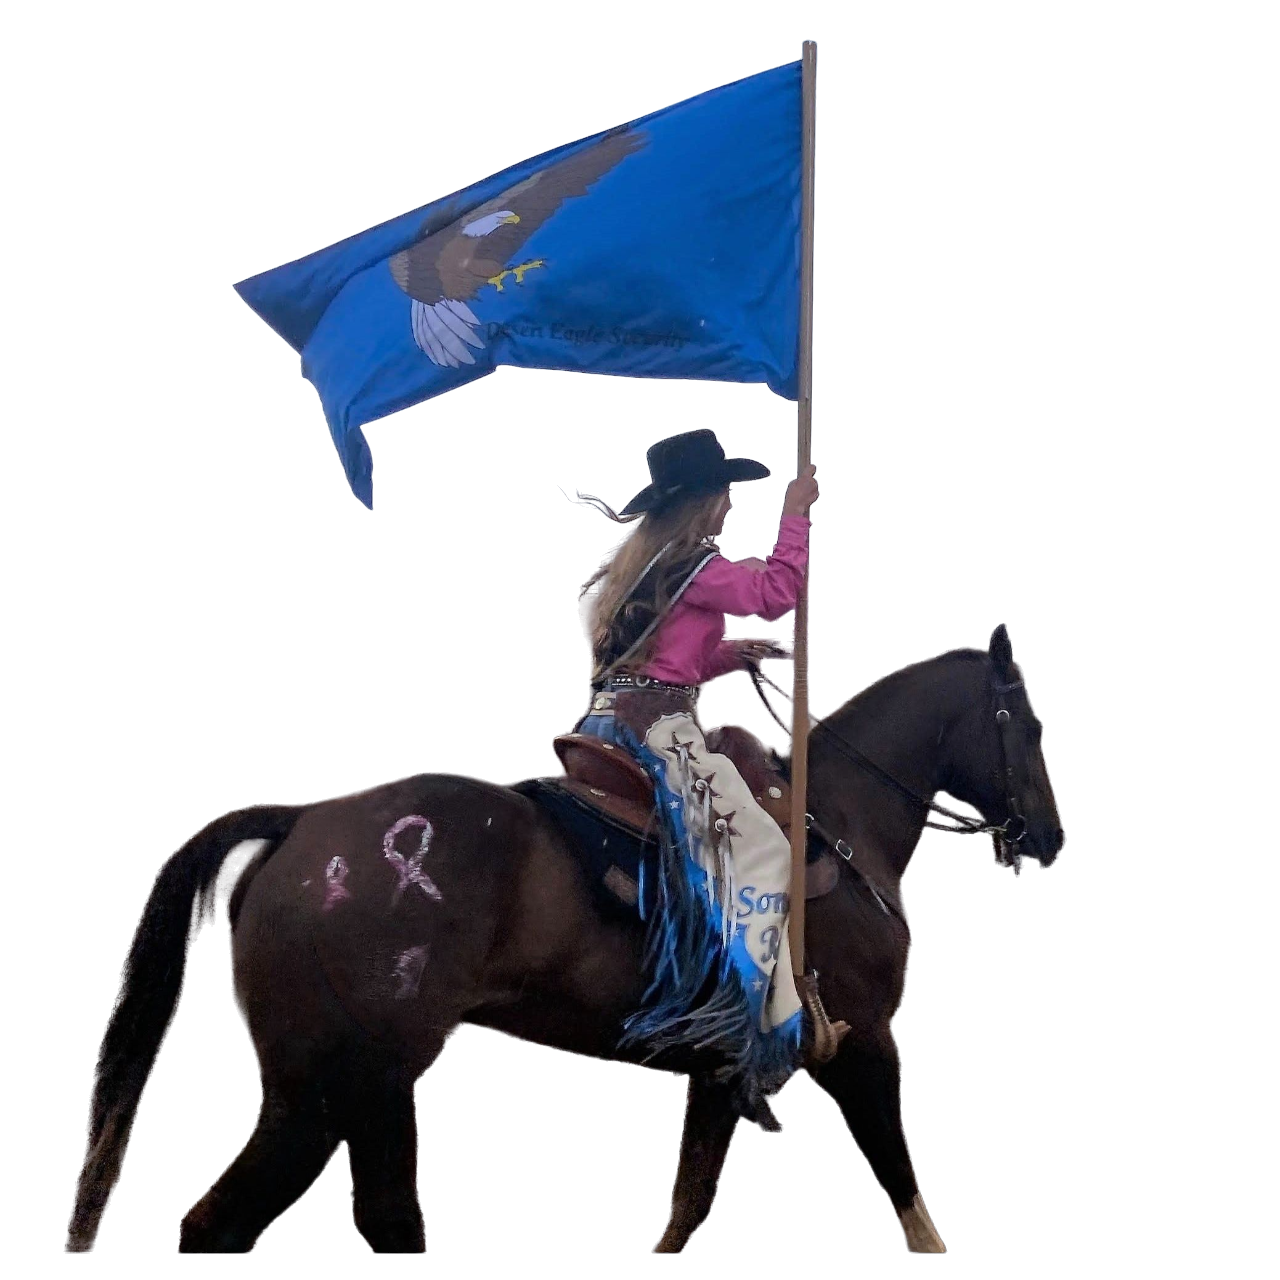 custom printed double sided rodeo flag carried by rider around rodeo ring